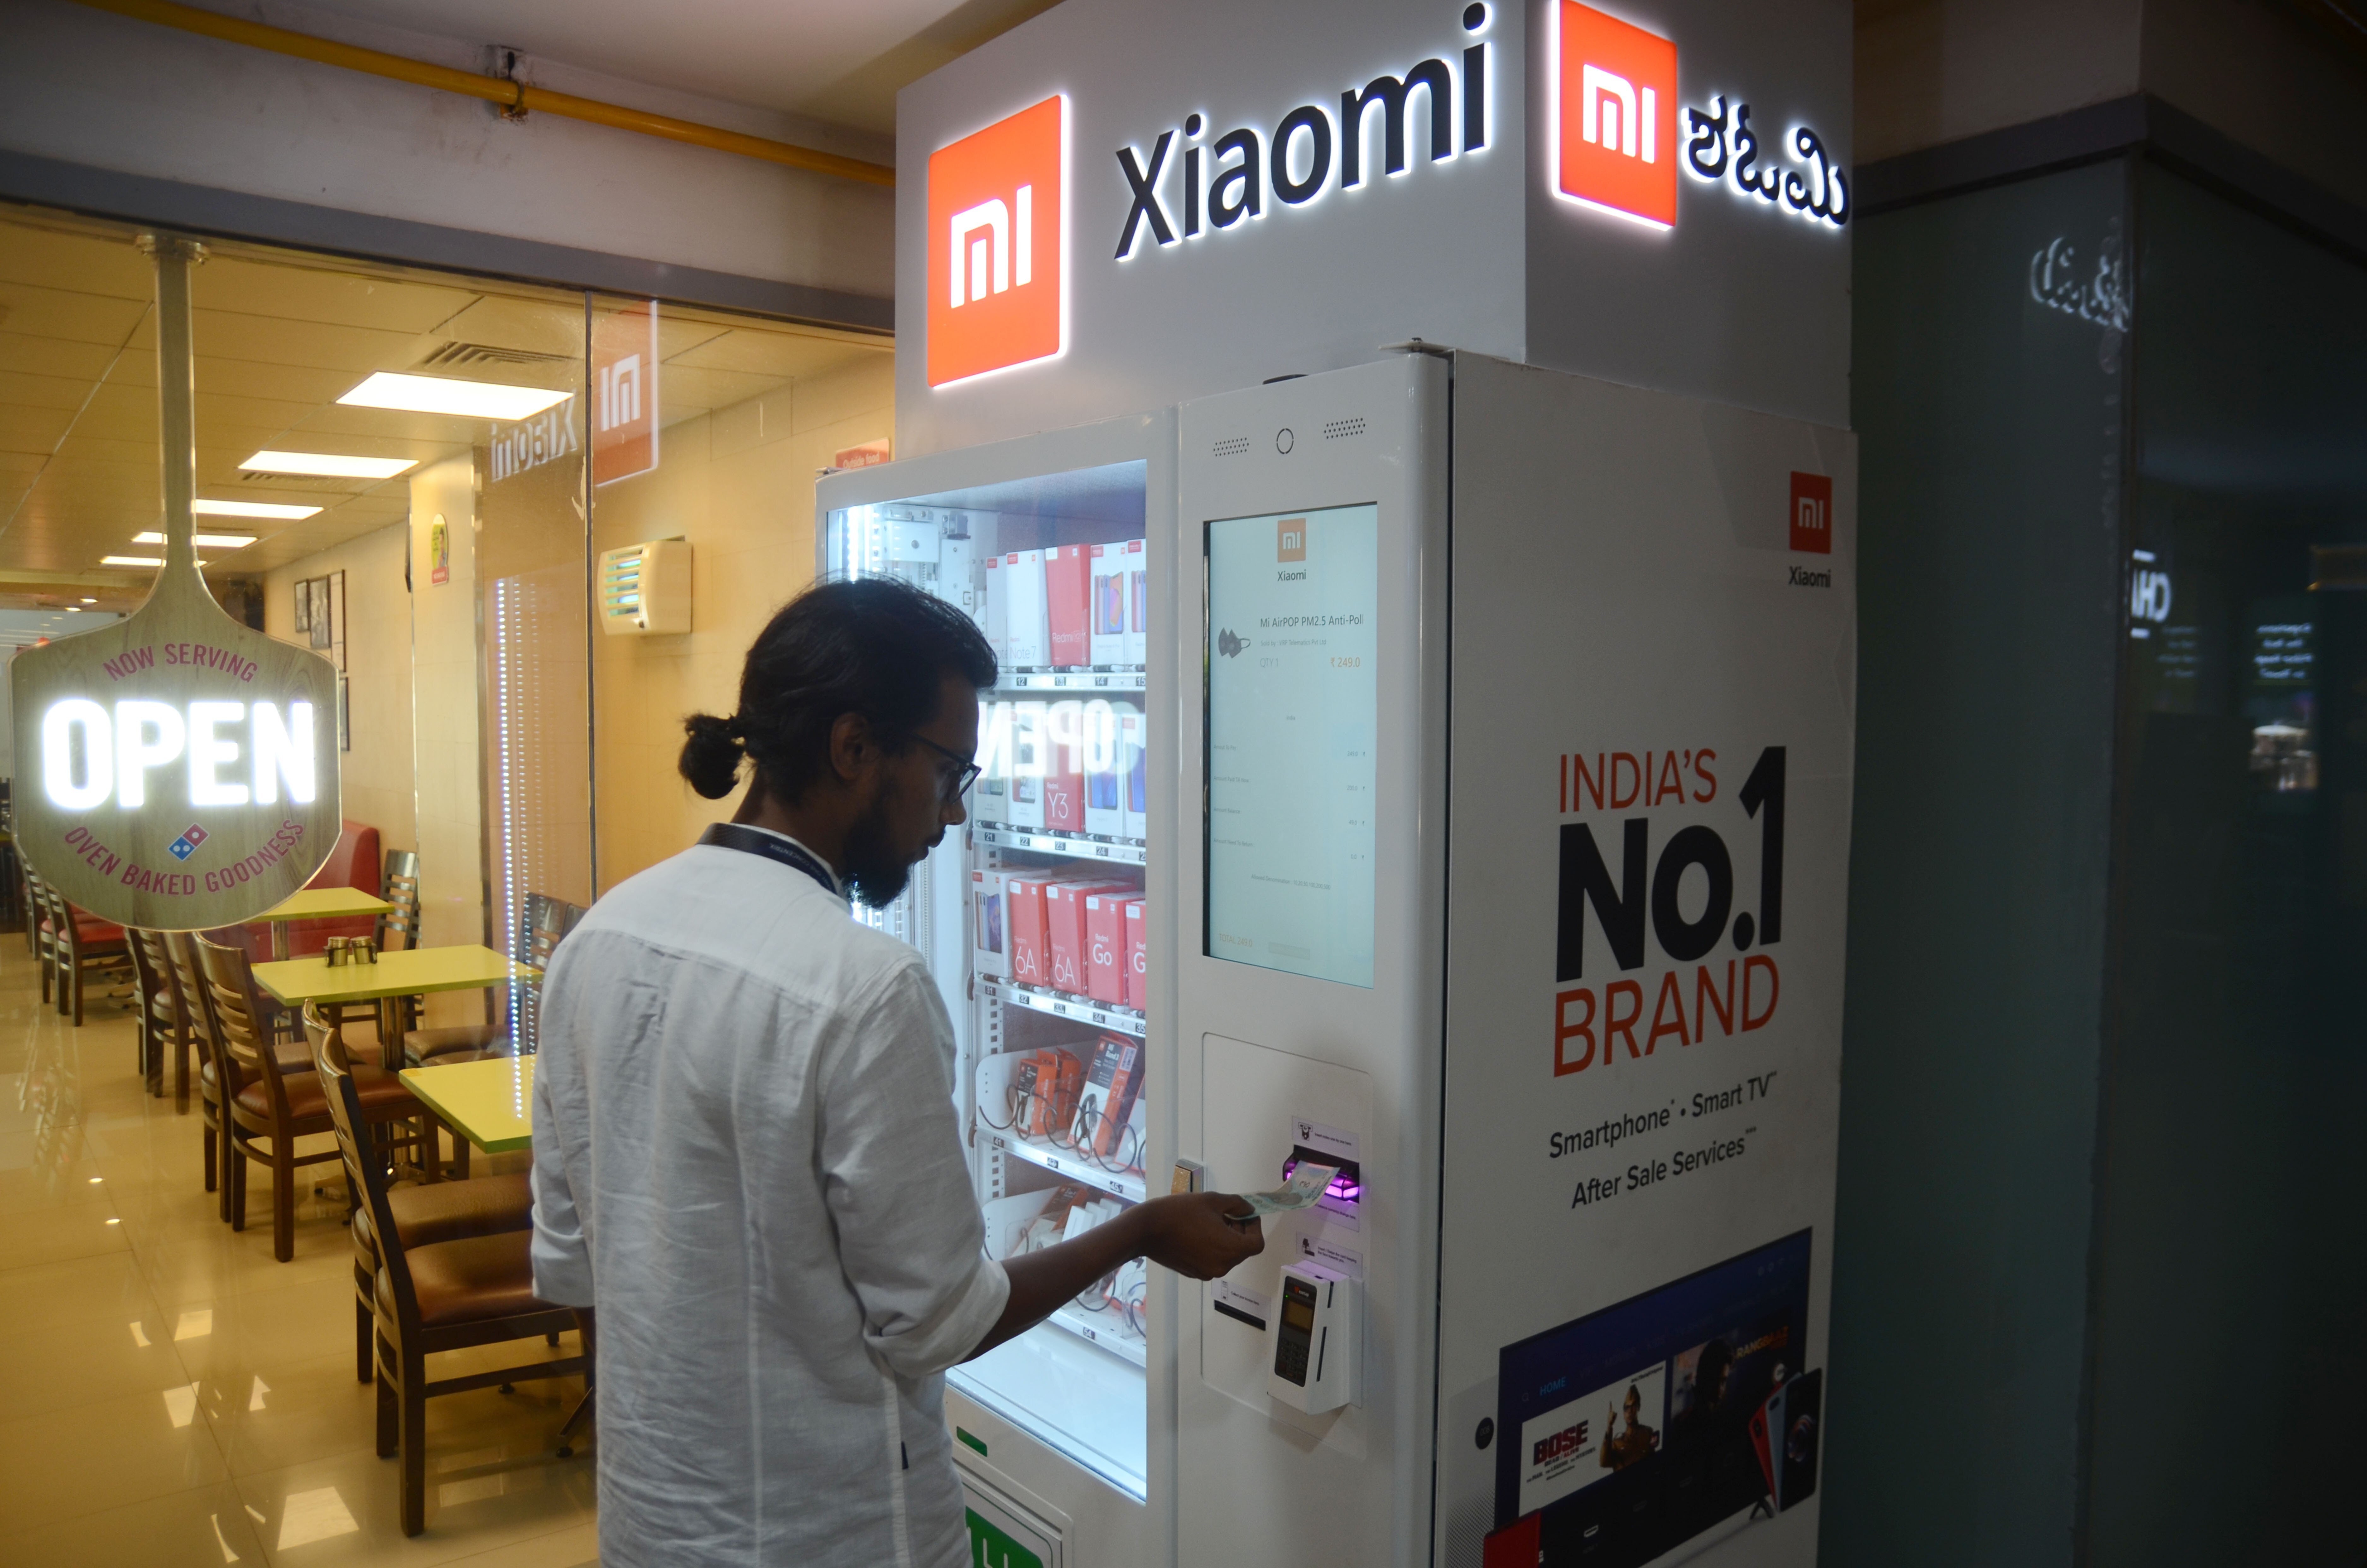 More than half of India’s 30 unicorn companies have received Chinese investment and Xiaomi is India’s leading smartphone brand. Photo: Xinhua